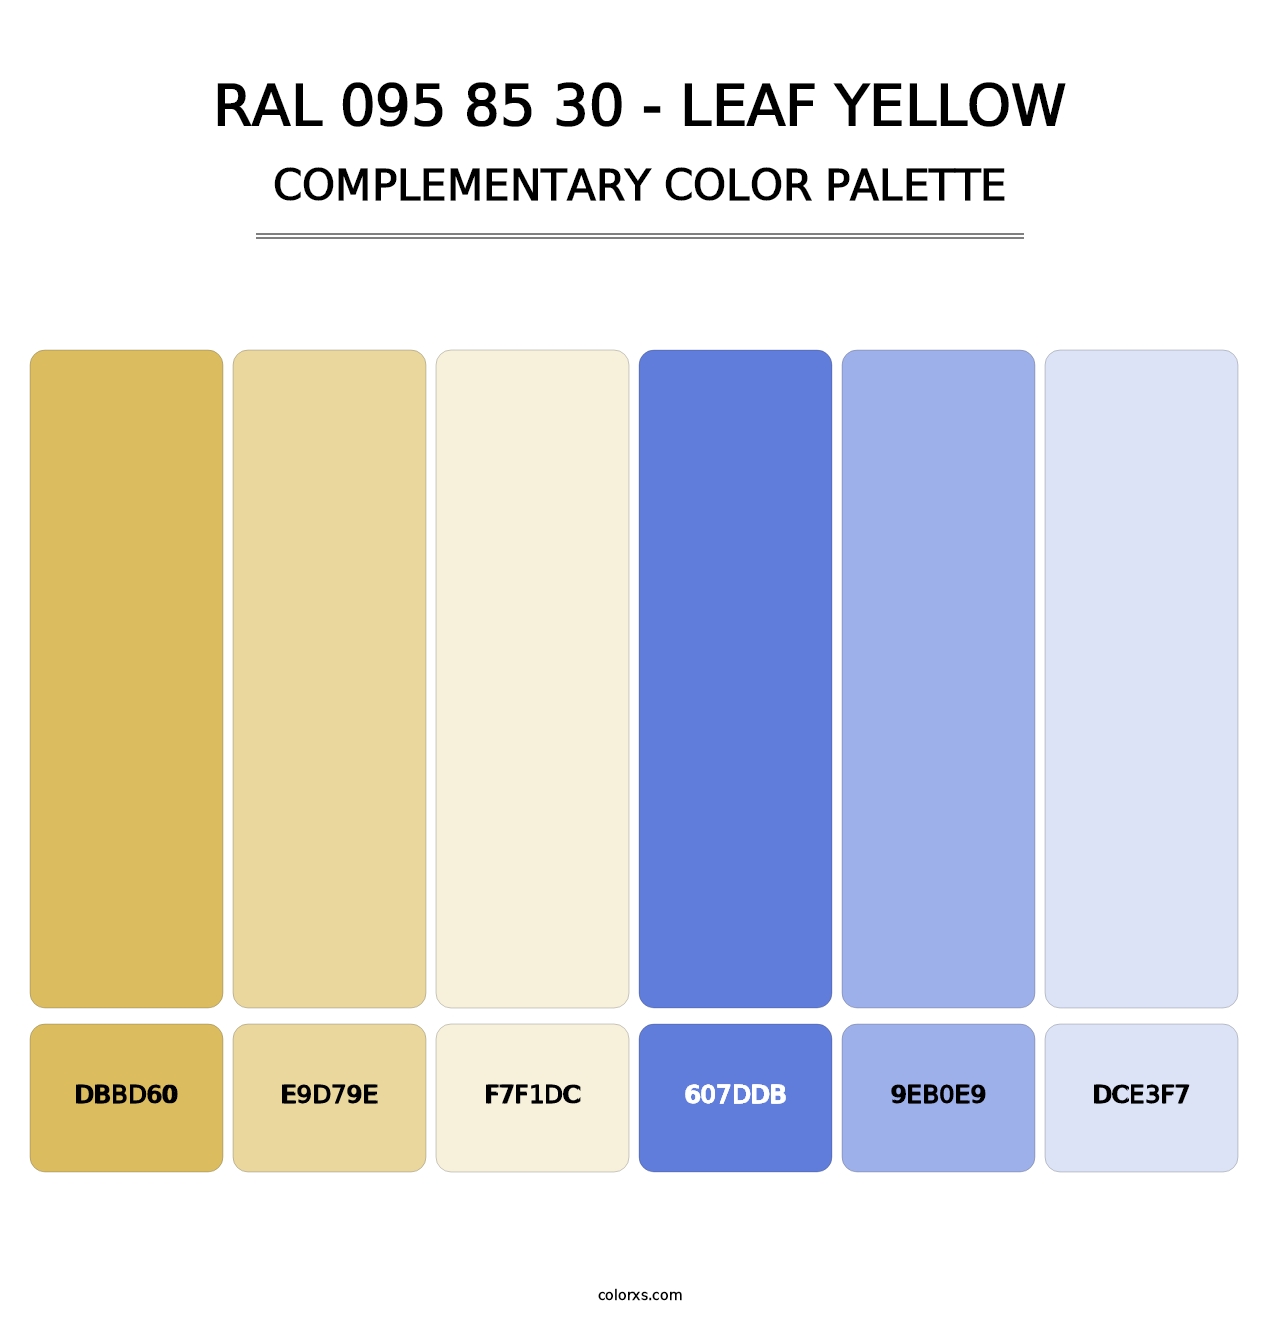 RAL 095 85 30 - Leaf Yellow - Complementary Color Palette